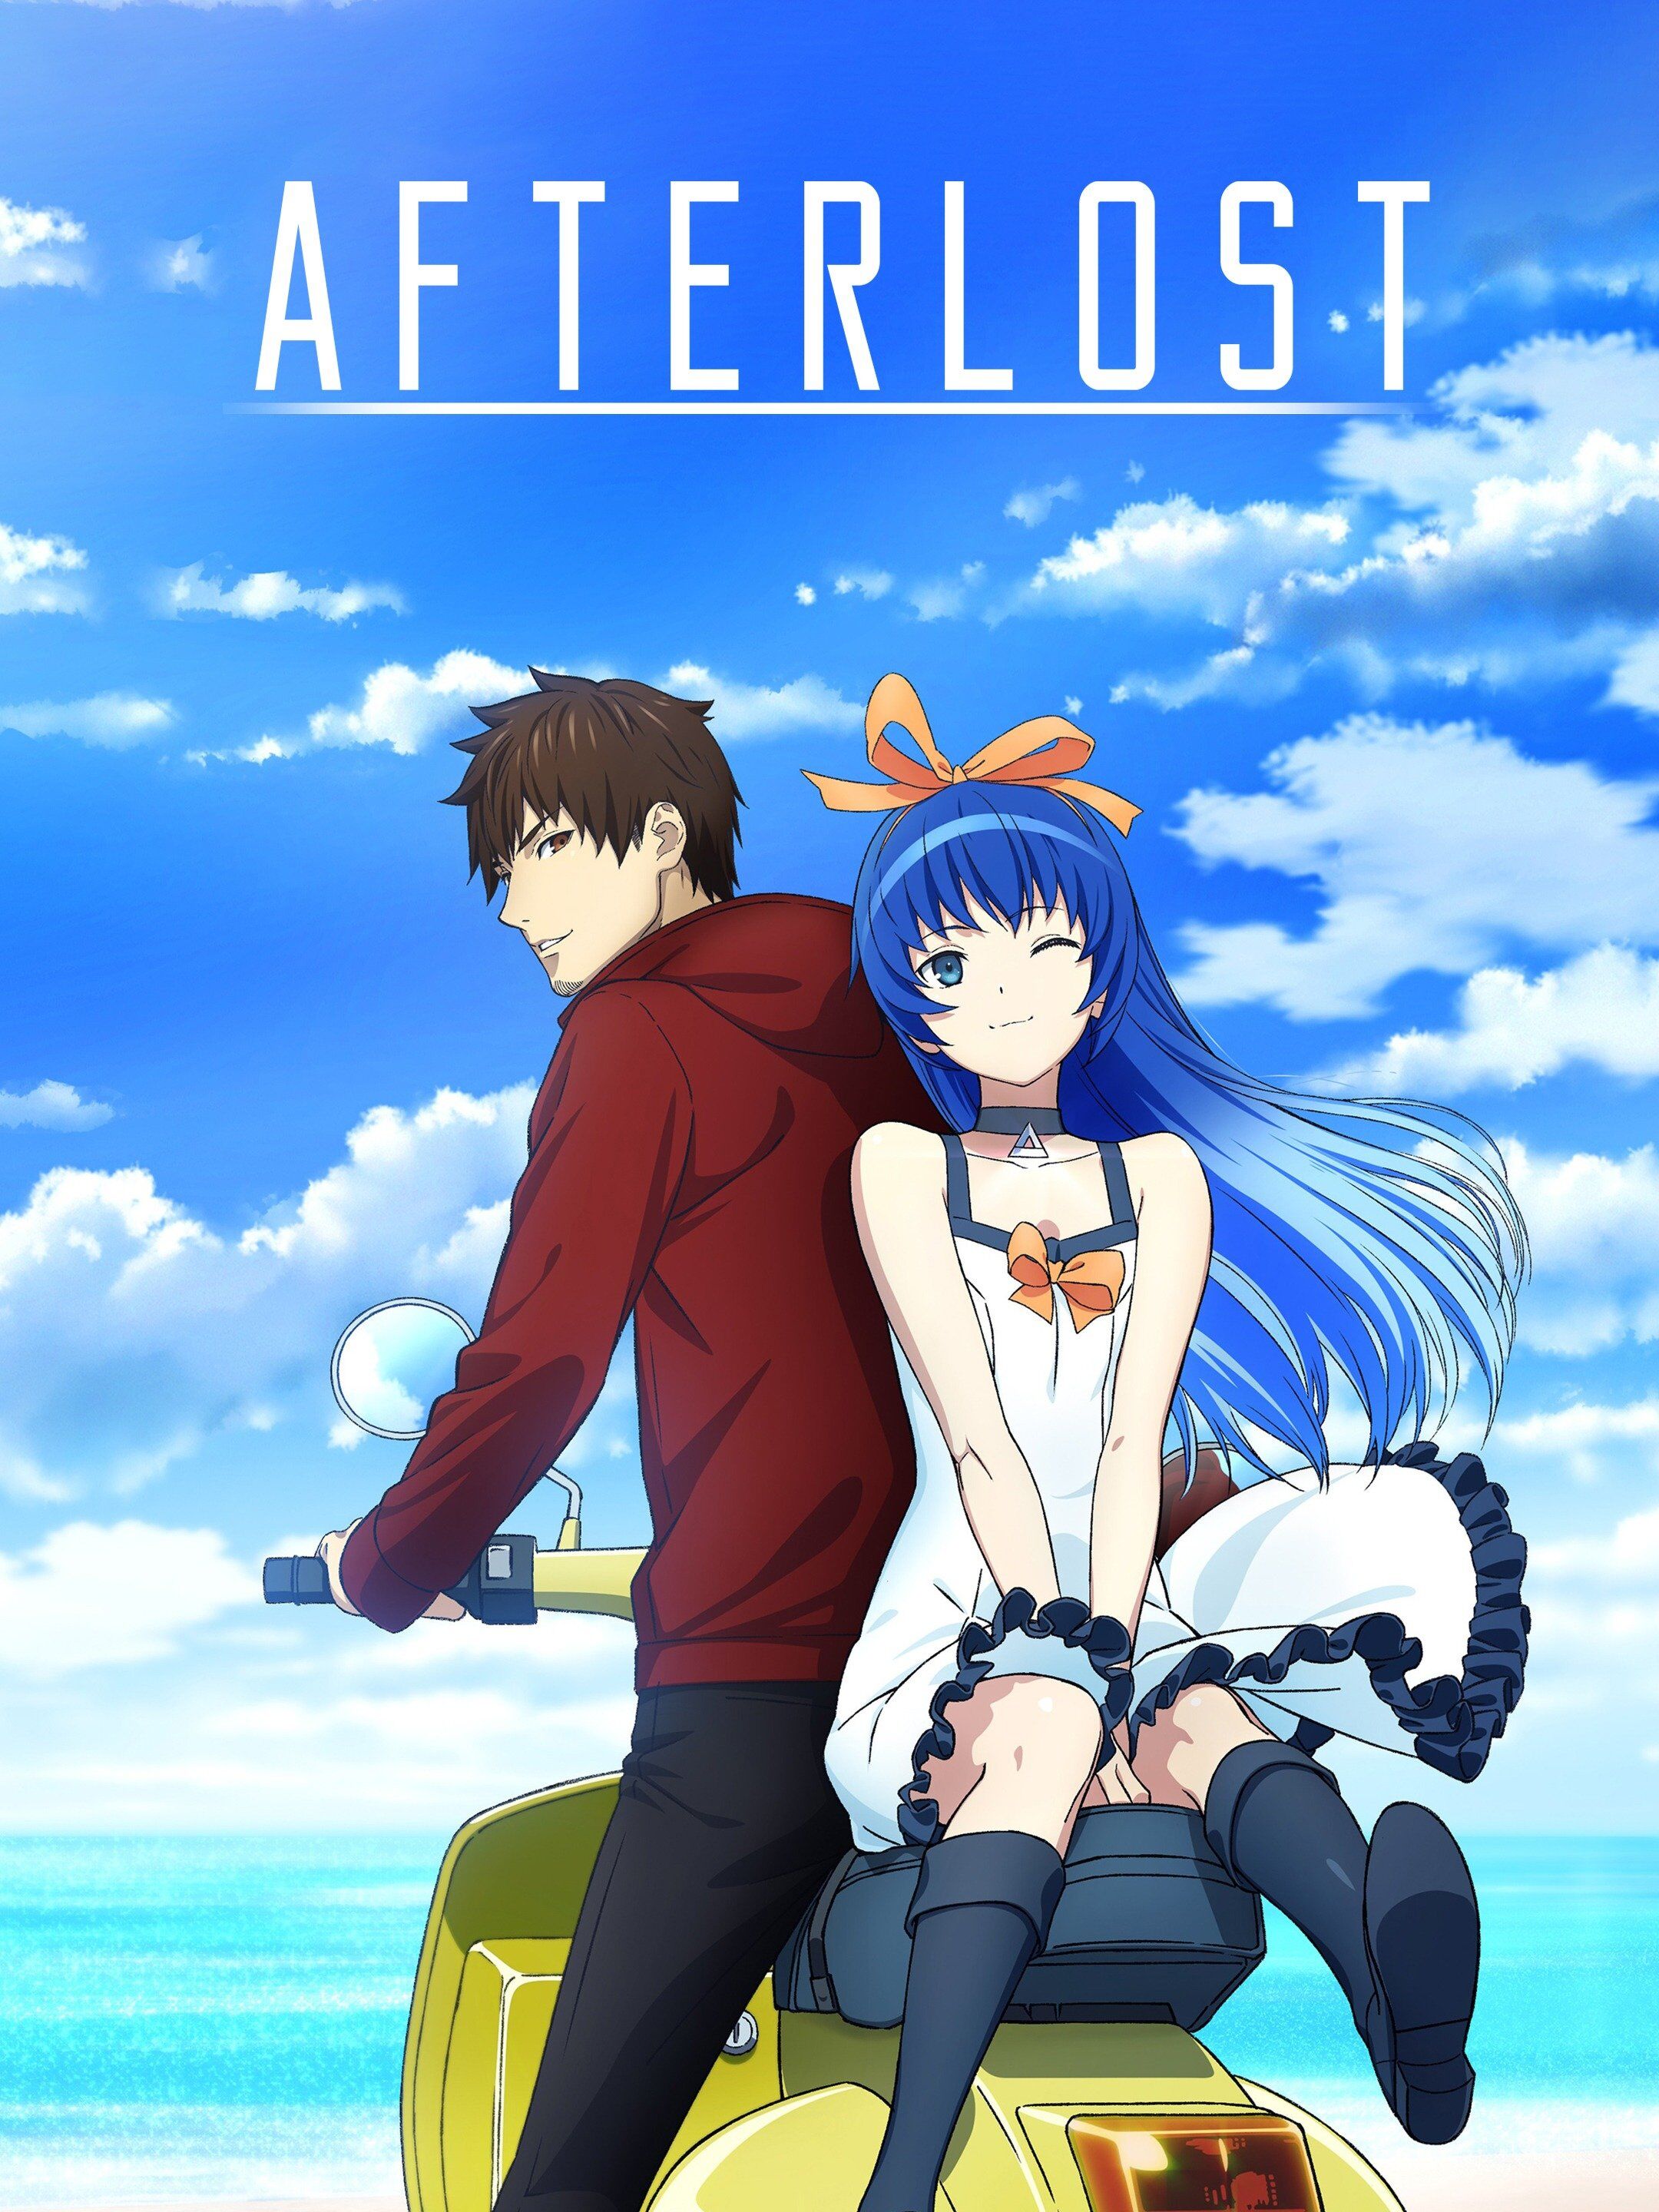 AFTERLOST - The Complete Series - Blu-ray | Crunchyroll Store